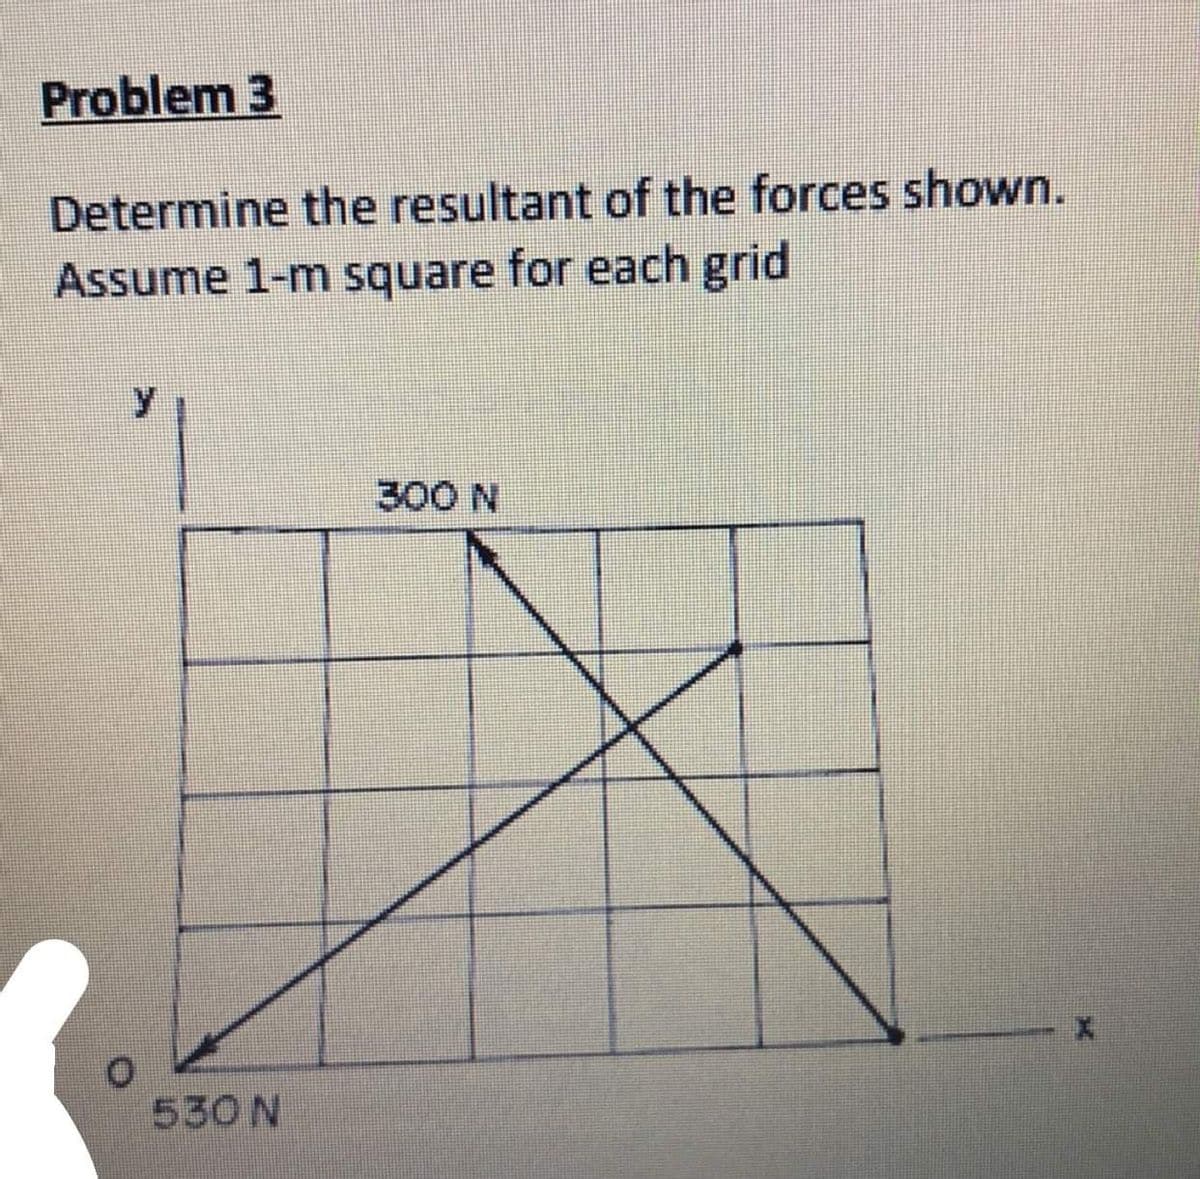 Problem 3
Determine the resultant of the forces shown.
Assume 1-m square for each grid
300 N
530 N
